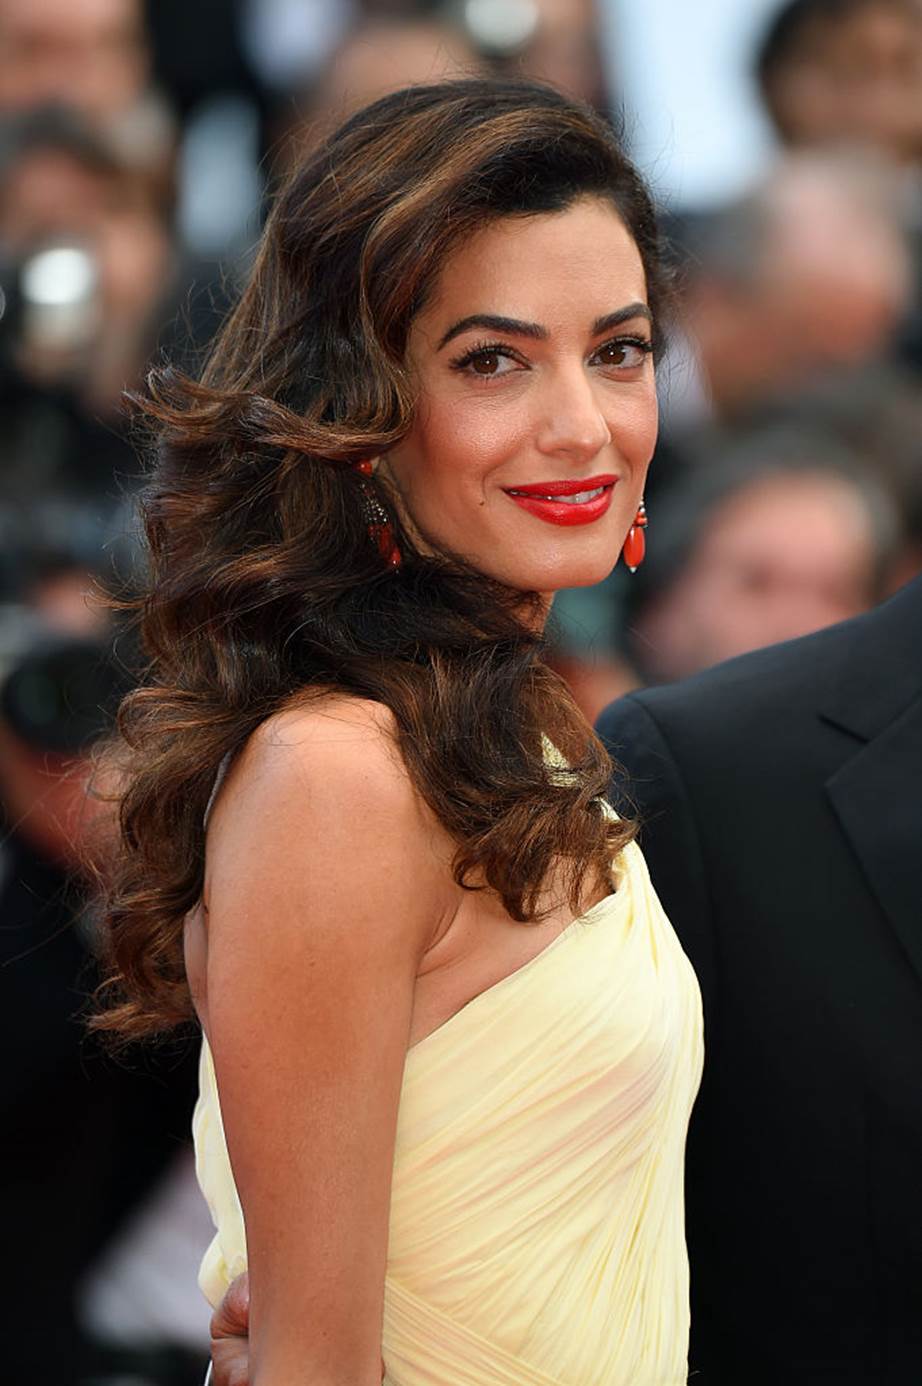 Amal Clooney in May 2016 at the 69th annual Cannes Film Festival.